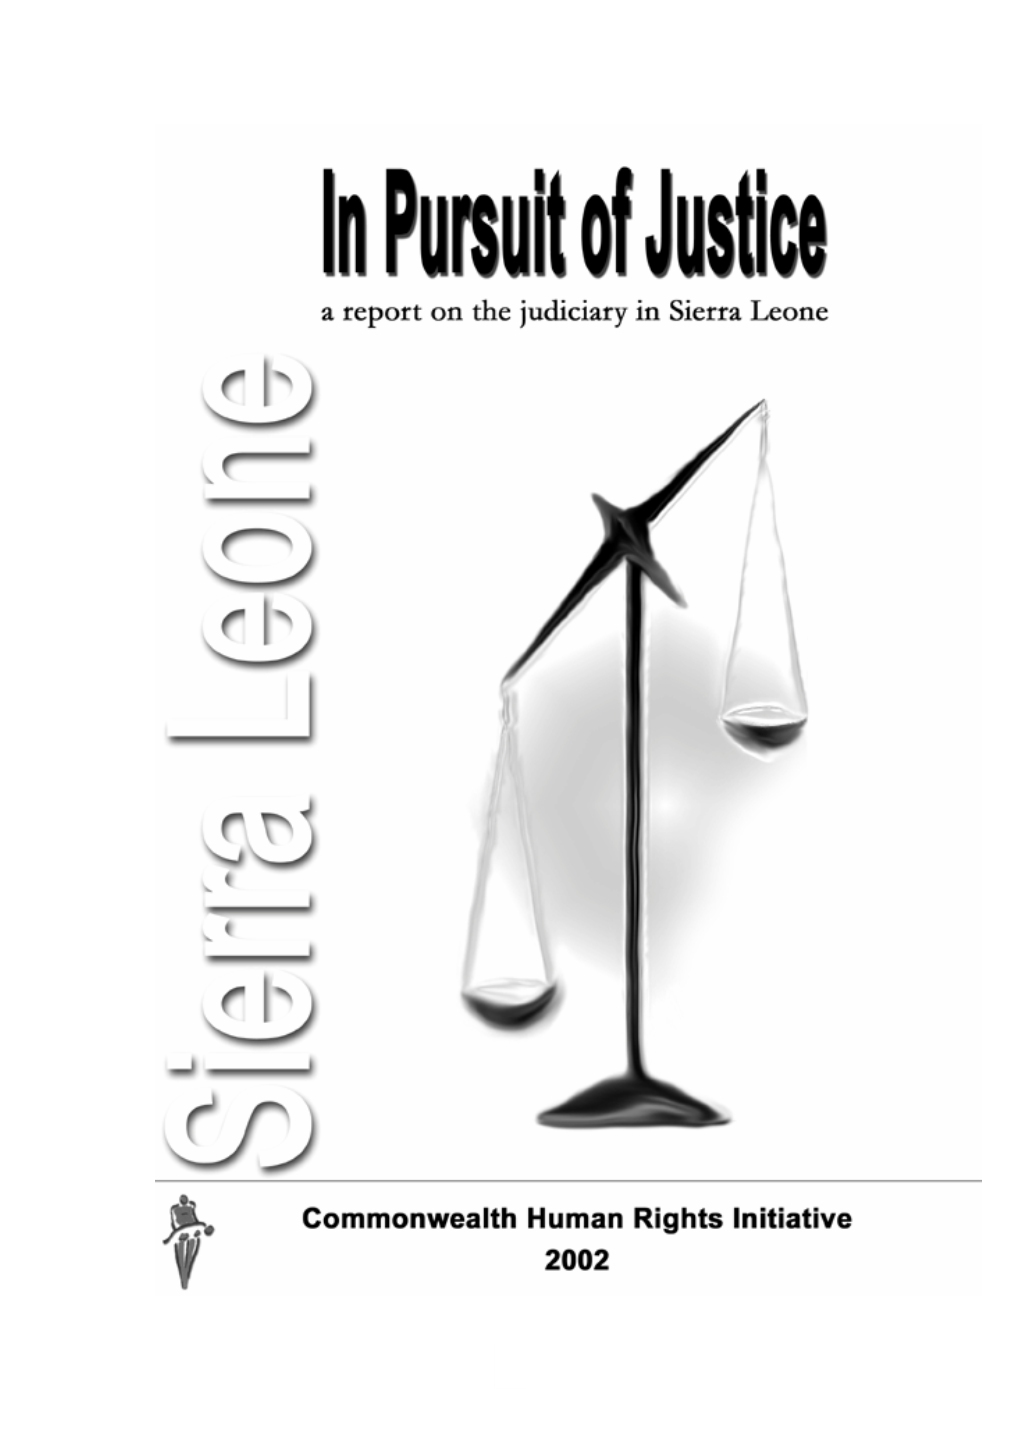 A Report on the Judiciary in Sierra Leone